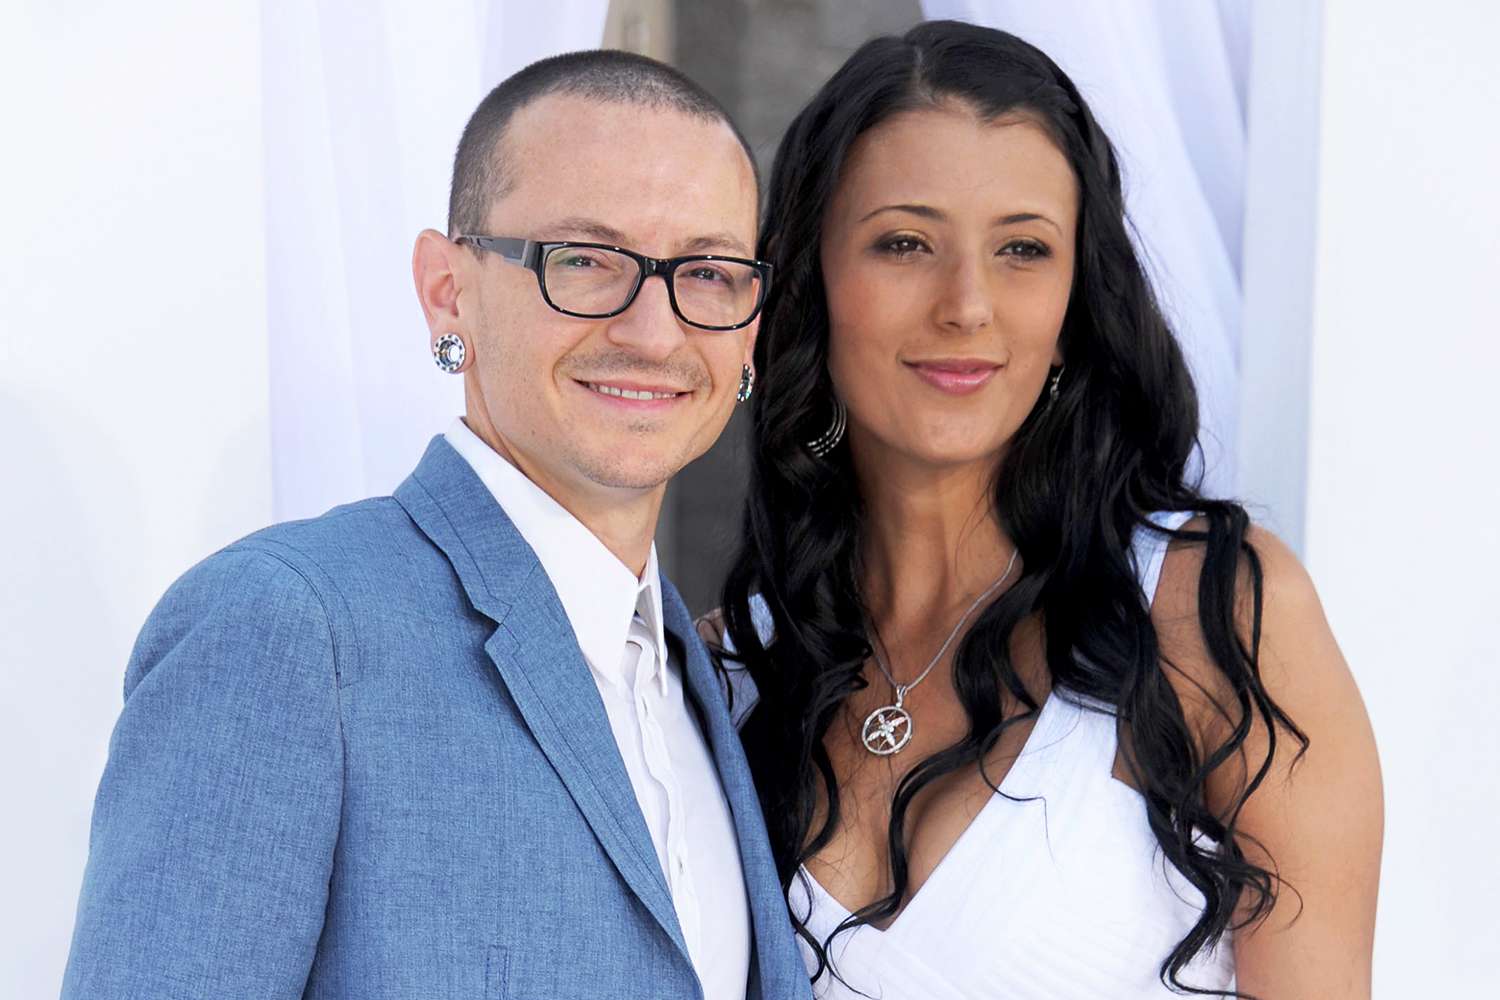 Chester Bennington of Linkin Park and wife Talinda Ann Bentley arrive at the 2012 Billboard Music Awards at MGM Grand on May 20, 2012 라스베가스에서, 네바다.